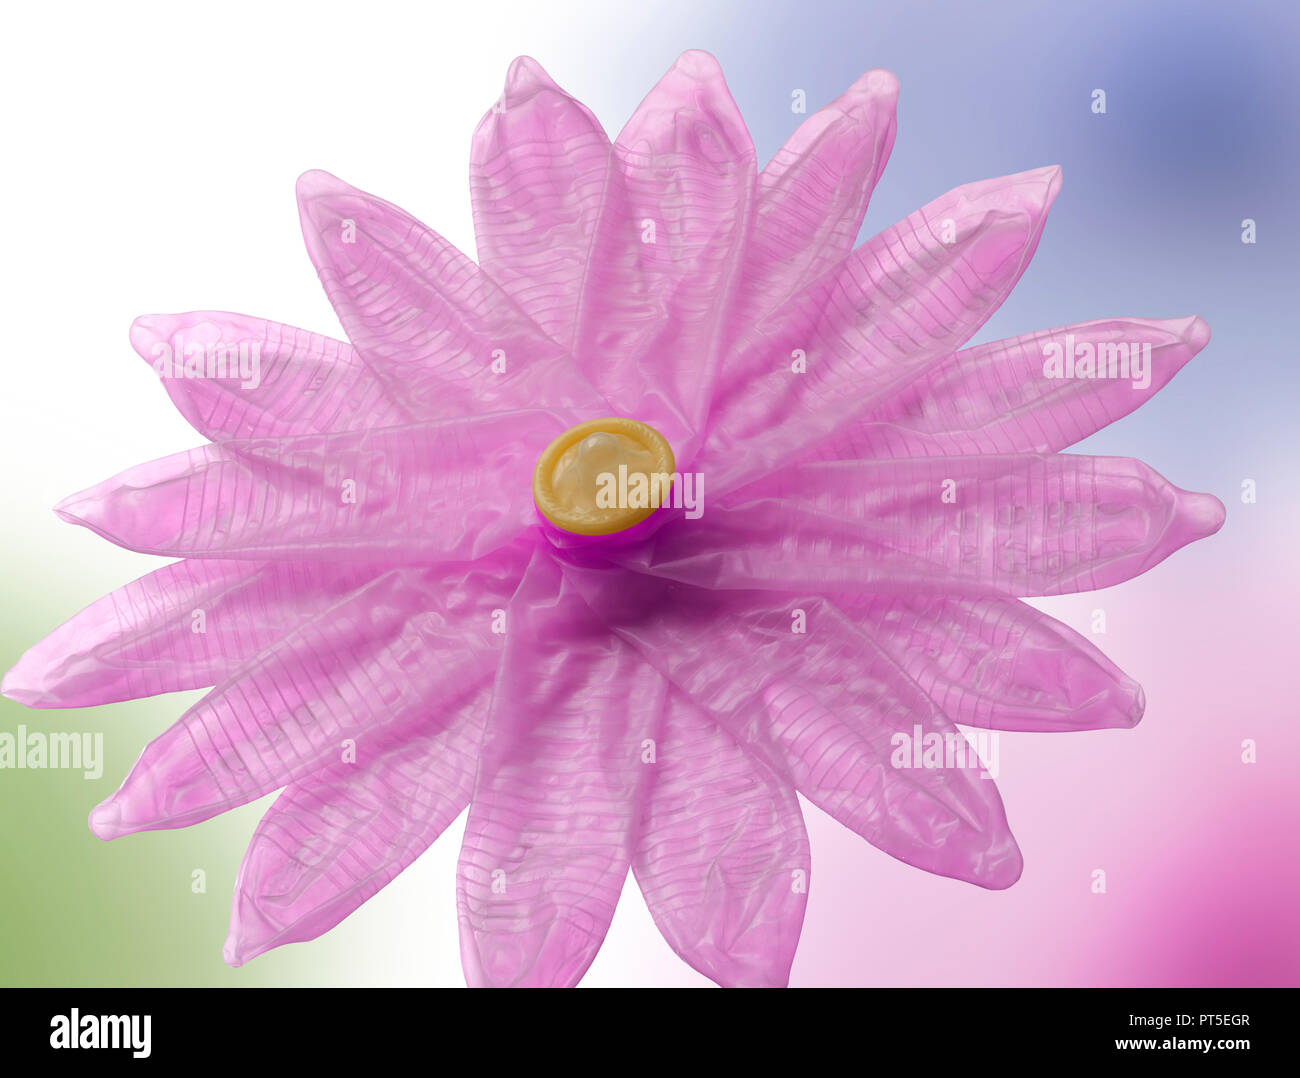 Concept Condoms in a shape of a pink flower Stock Photo